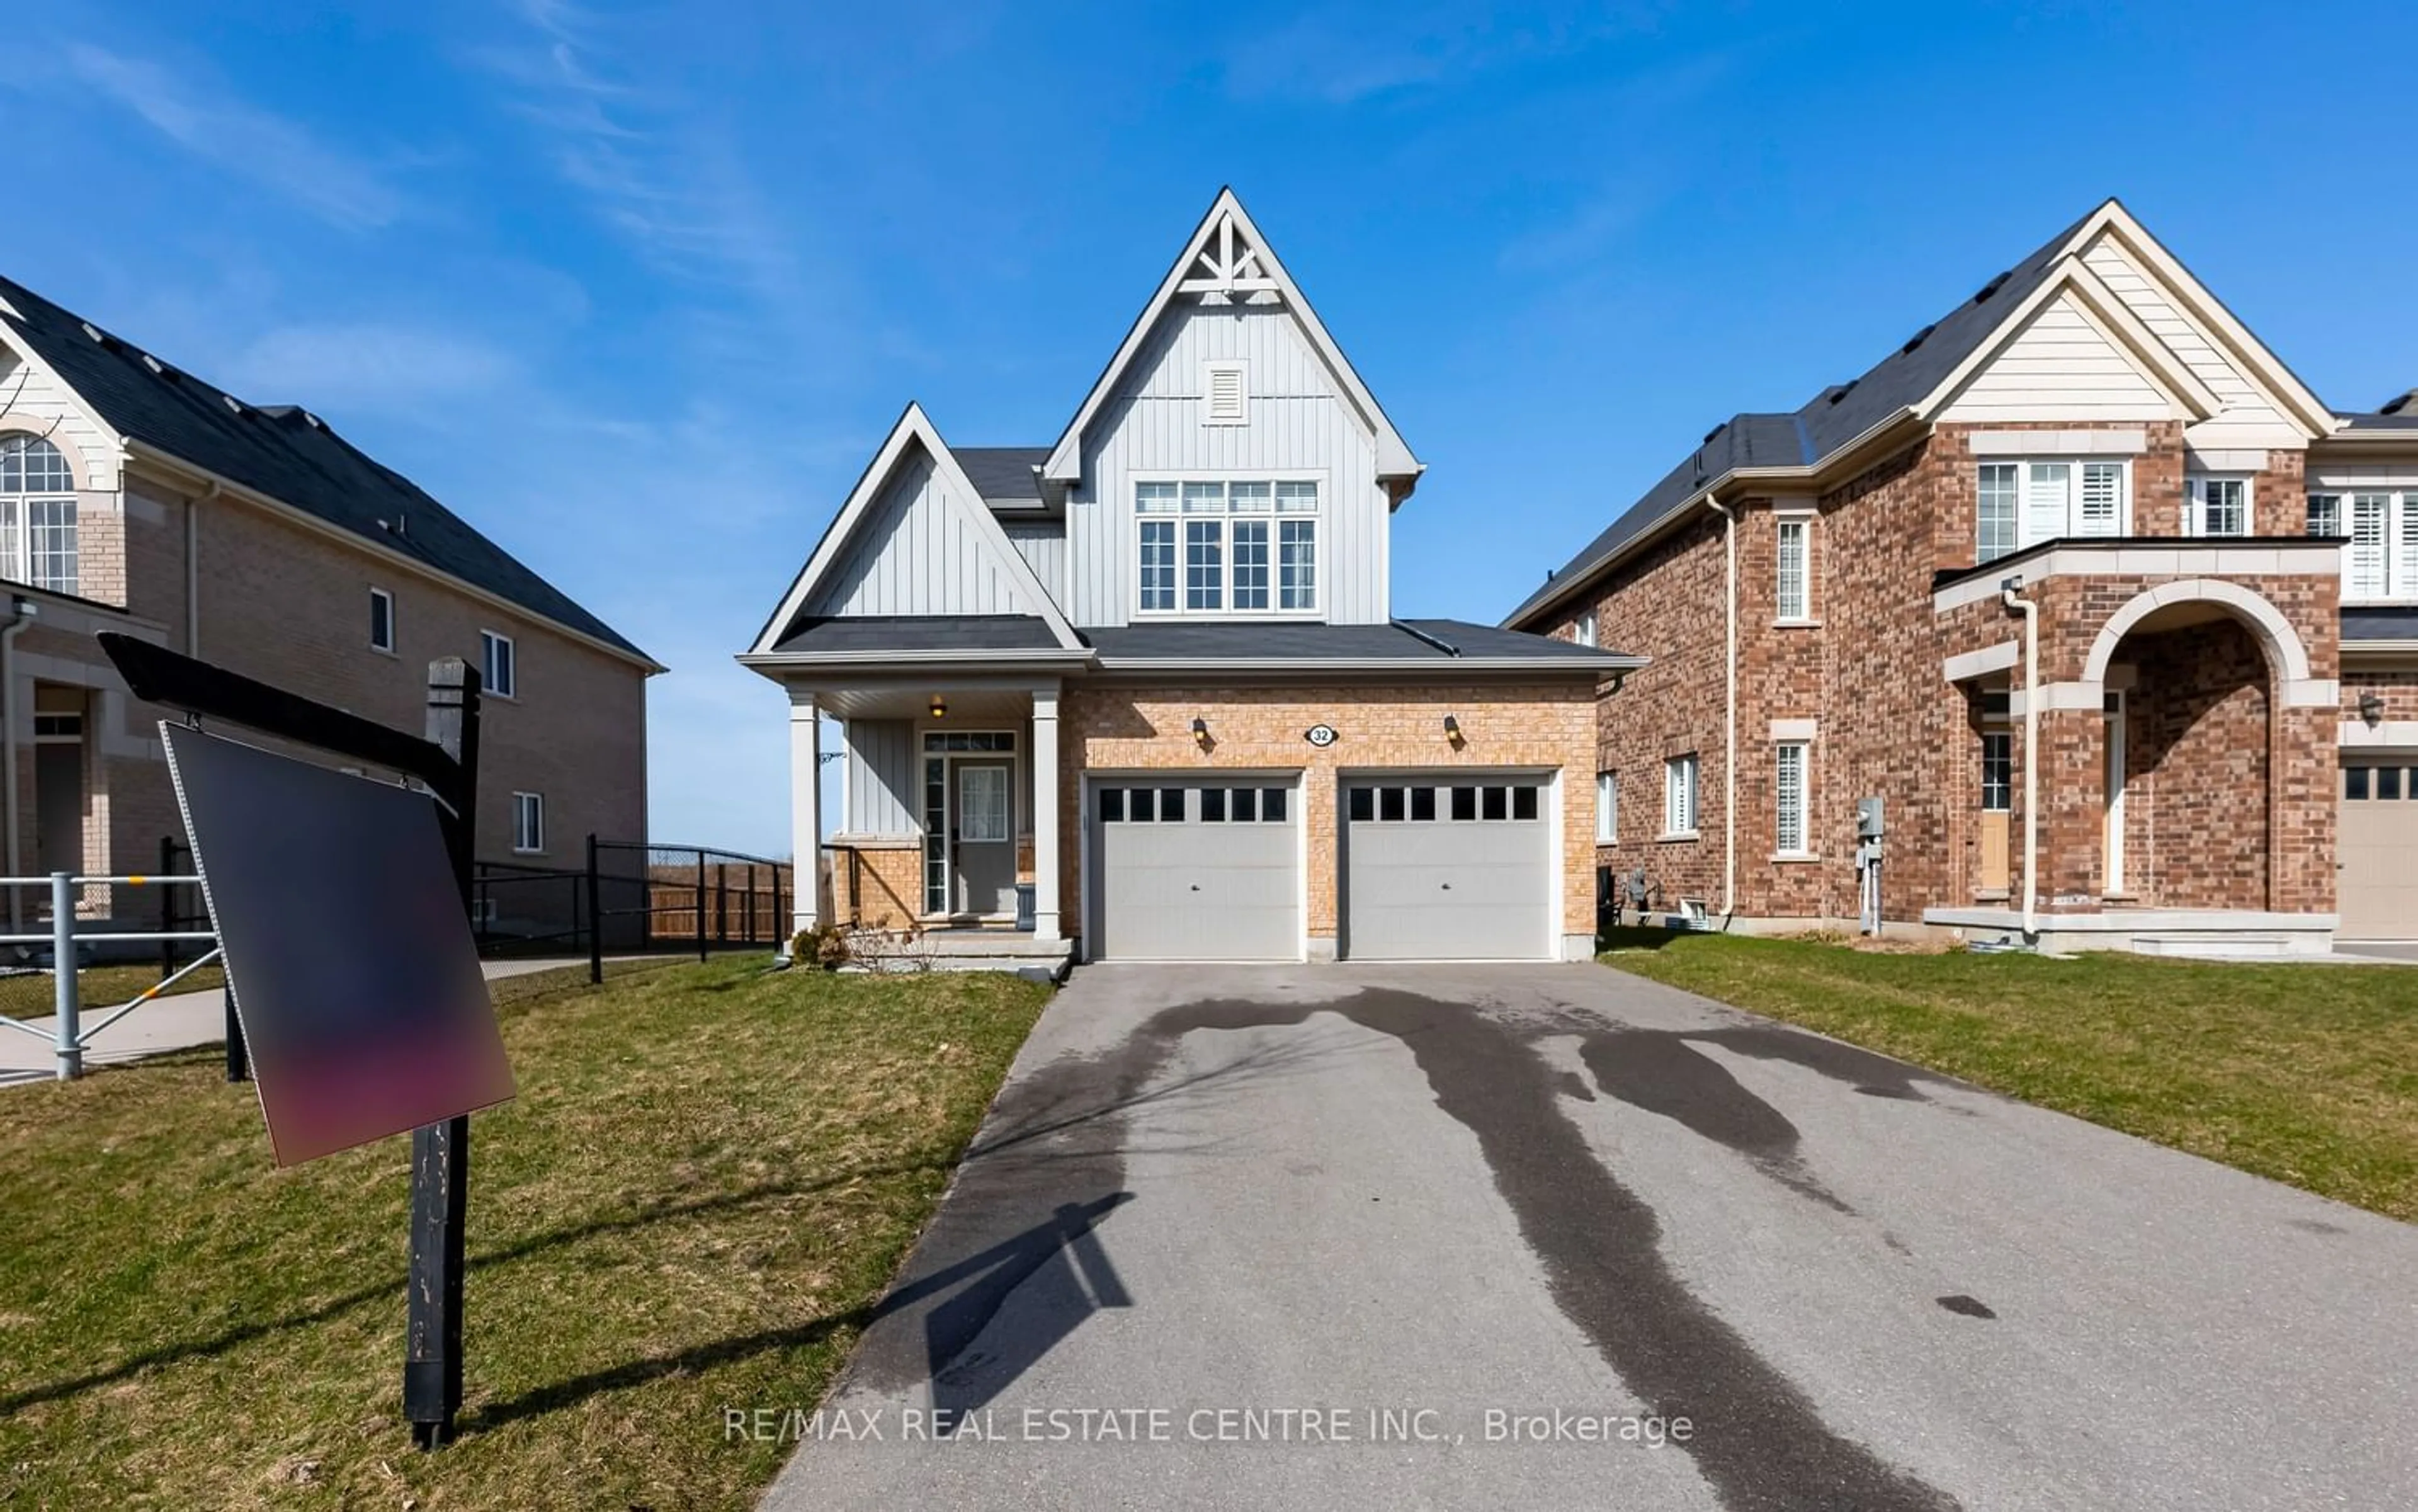 Home with brick exterior material for 32 Jenkins St, East Luther Grand Valley Ontario L9W 7R3